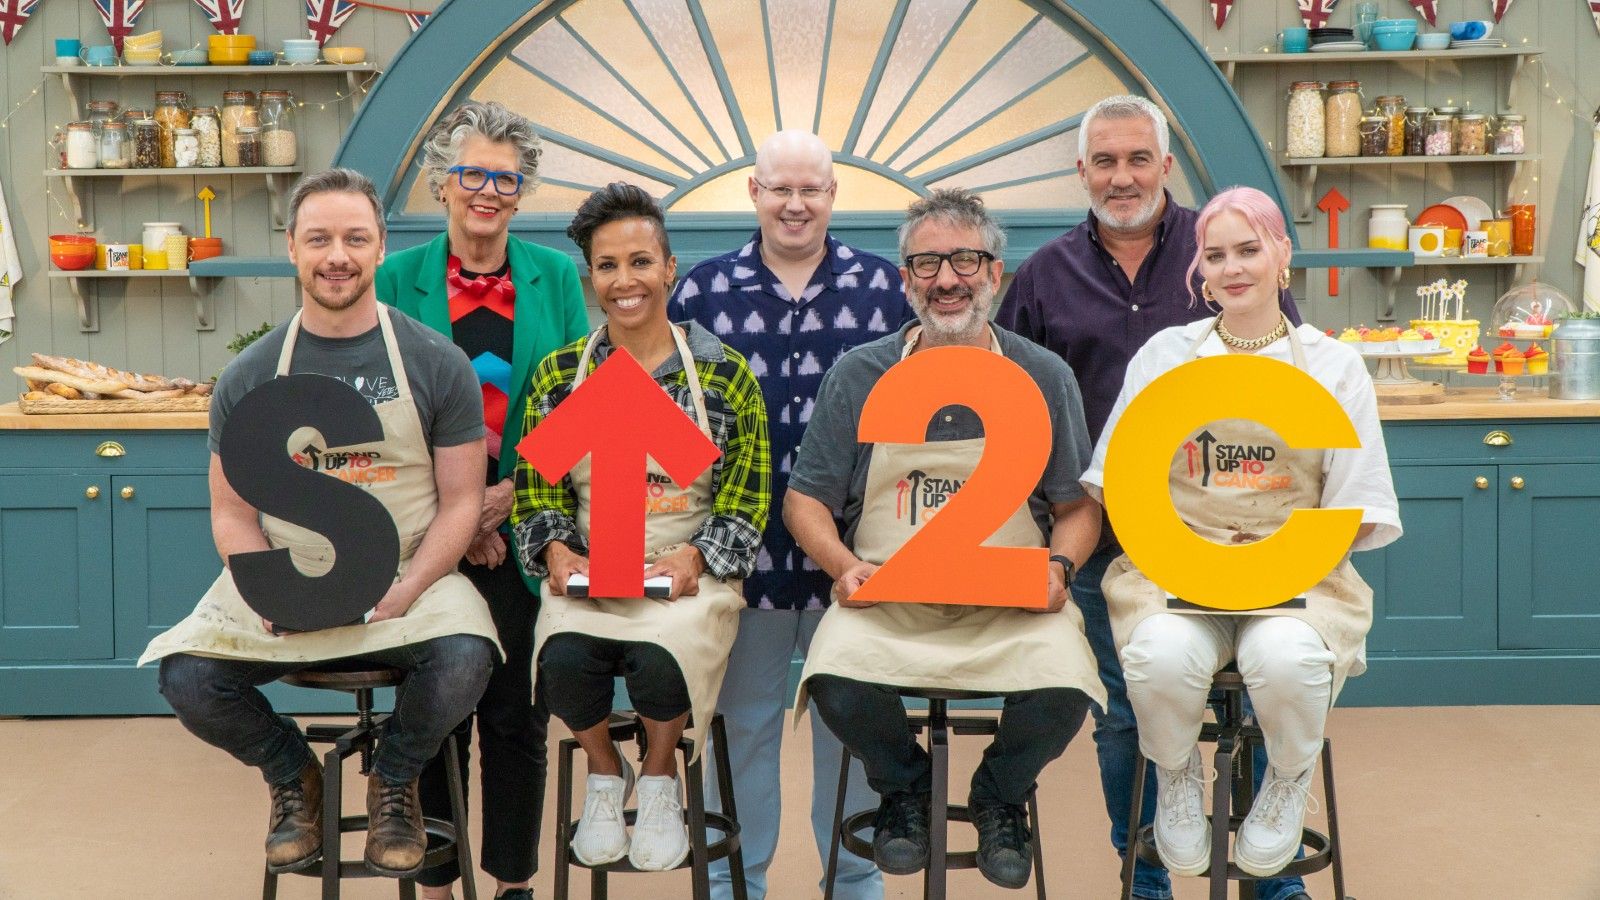 How to watch The Great Celebrity Bake Off My Imperfect Life